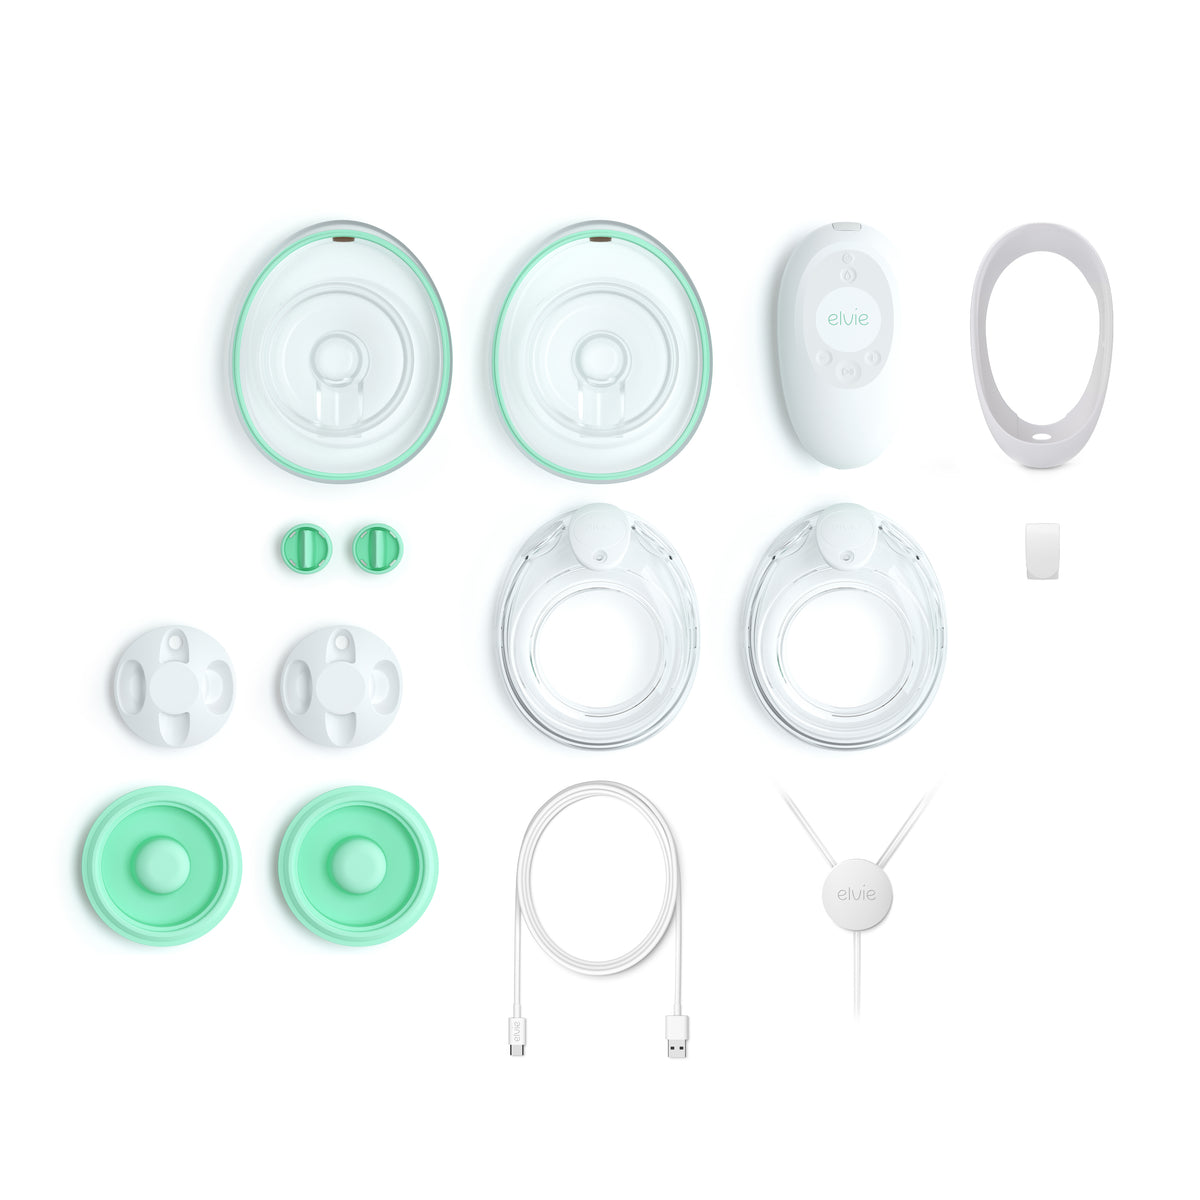 Zomee Fit Breast Pump  The Breastfeeding Shop